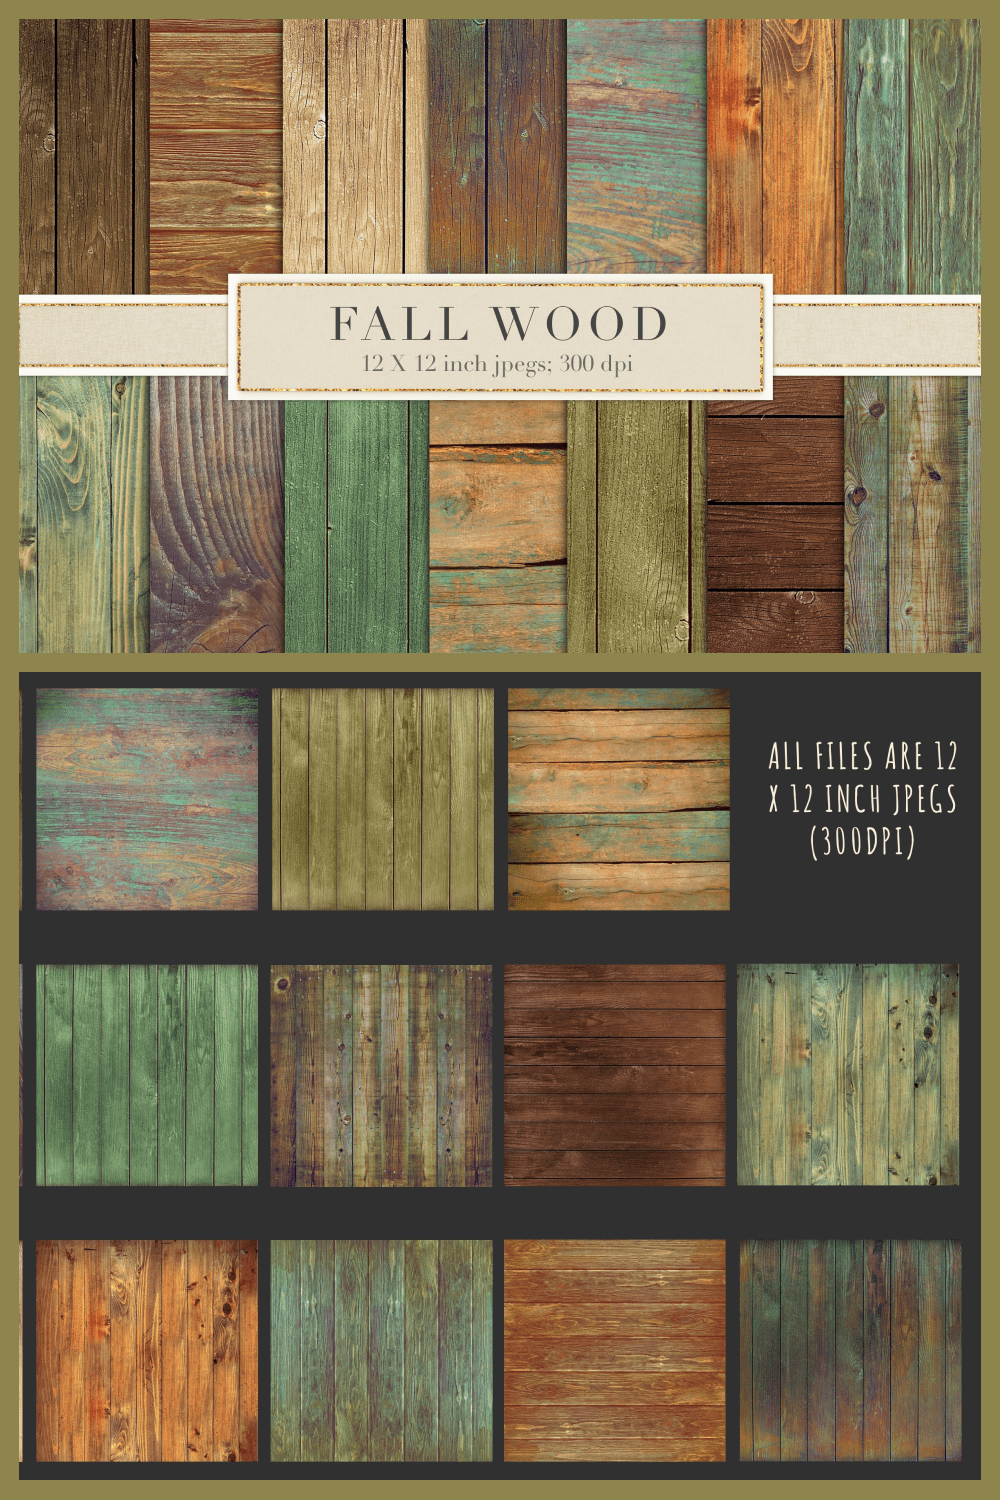 Fall wood textures.